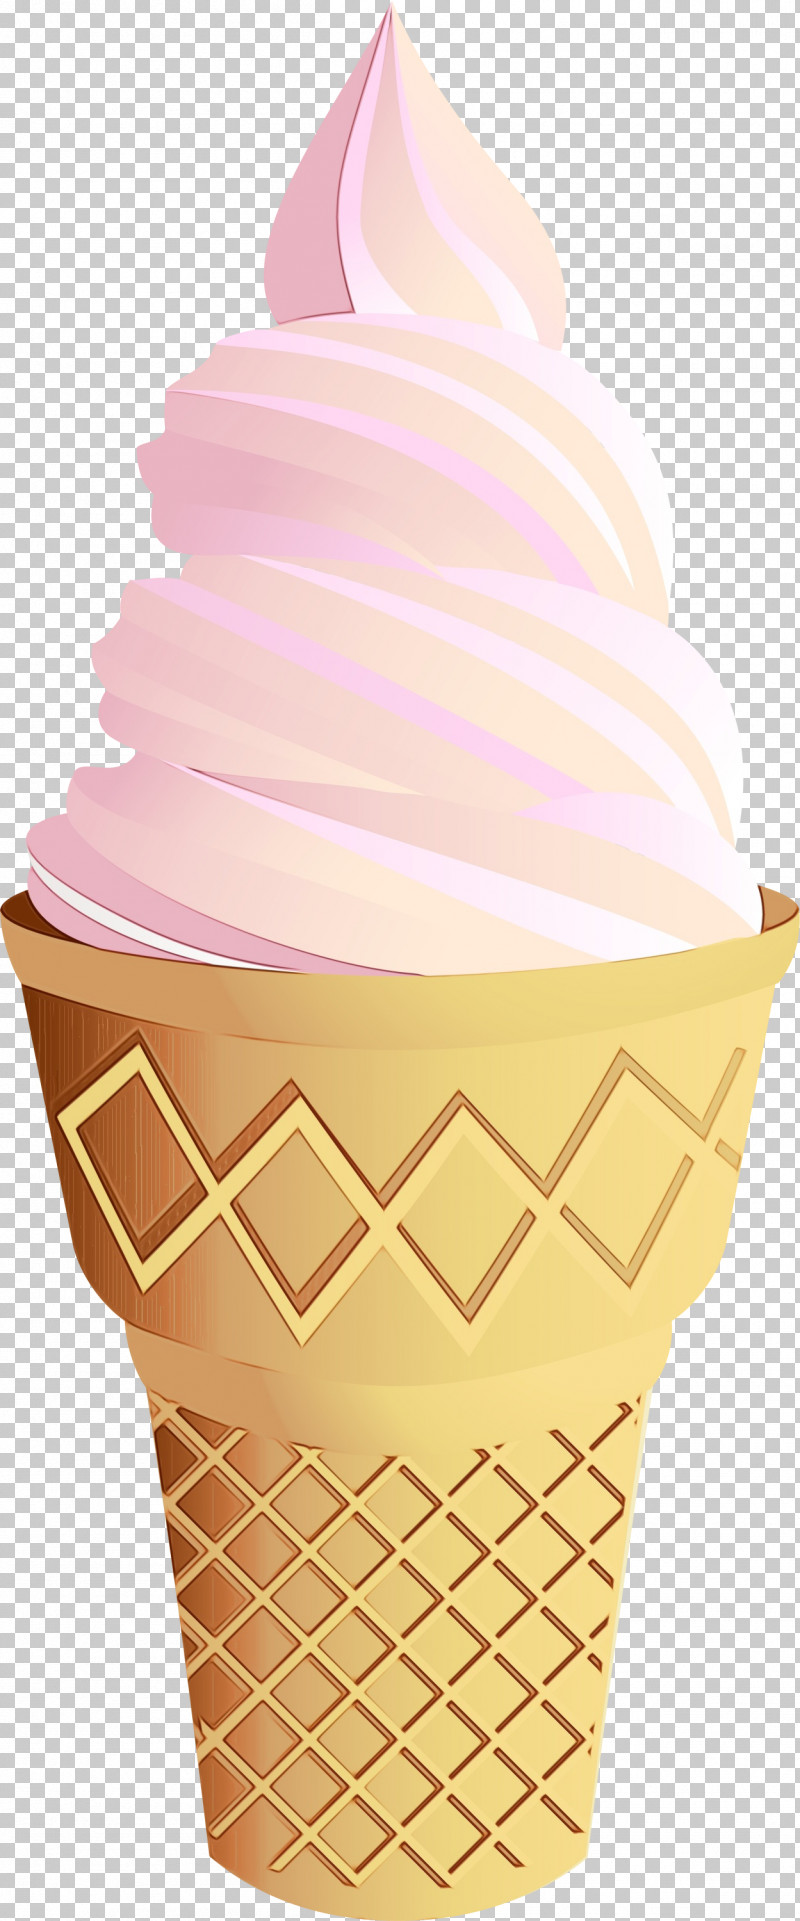 Ice Cream PNG, Clipart, Baking Cup, Cone, Cream, Dairy, Dessert Free PNG Download